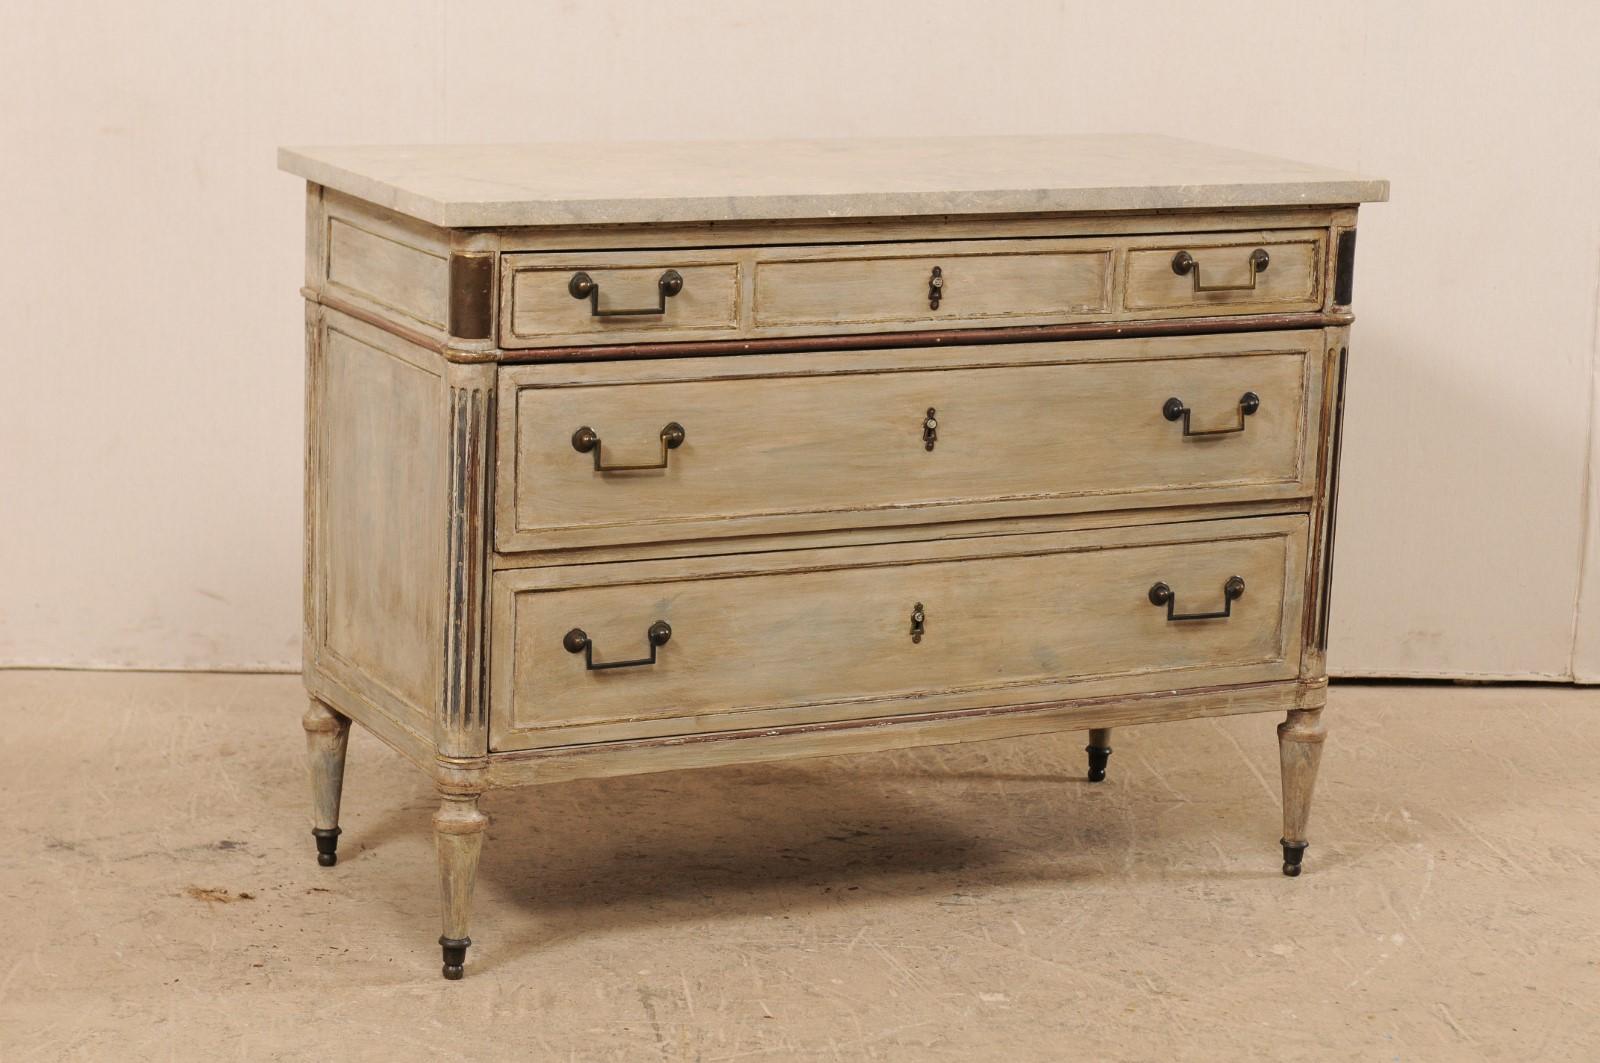 A French early 19th century wood carved chest of drawers with stone top. This antique chest from France features a rectangular-shaped fossilized limestone top, with rests atop a neoclassical case with rounded side posts which are fluted and